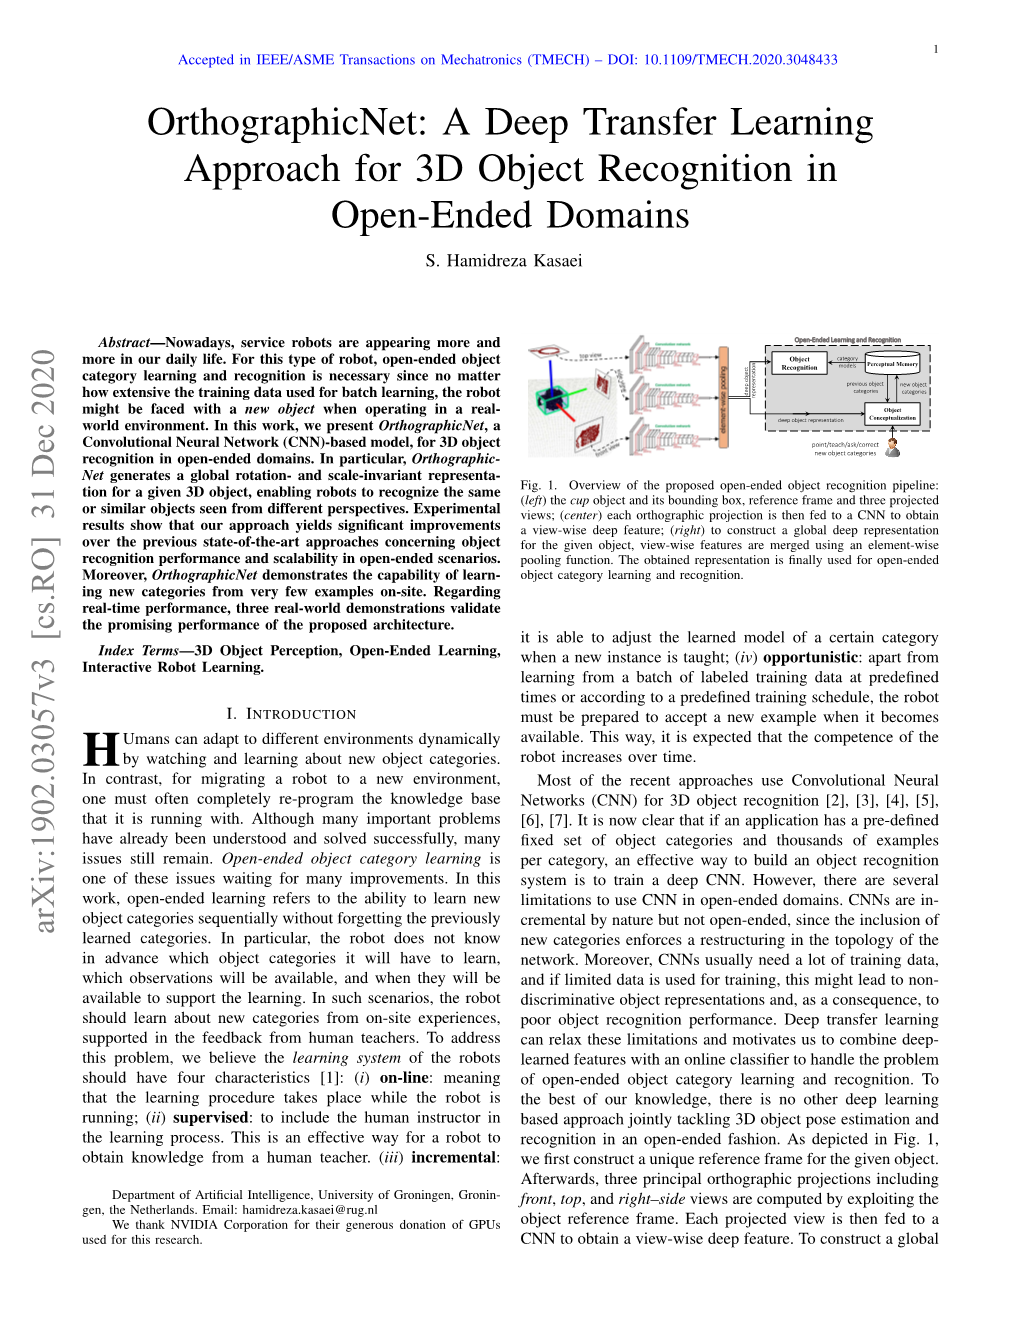 A Deep Transfer Learning Approach for 3D Object Recognition in Open-Ended Domains S